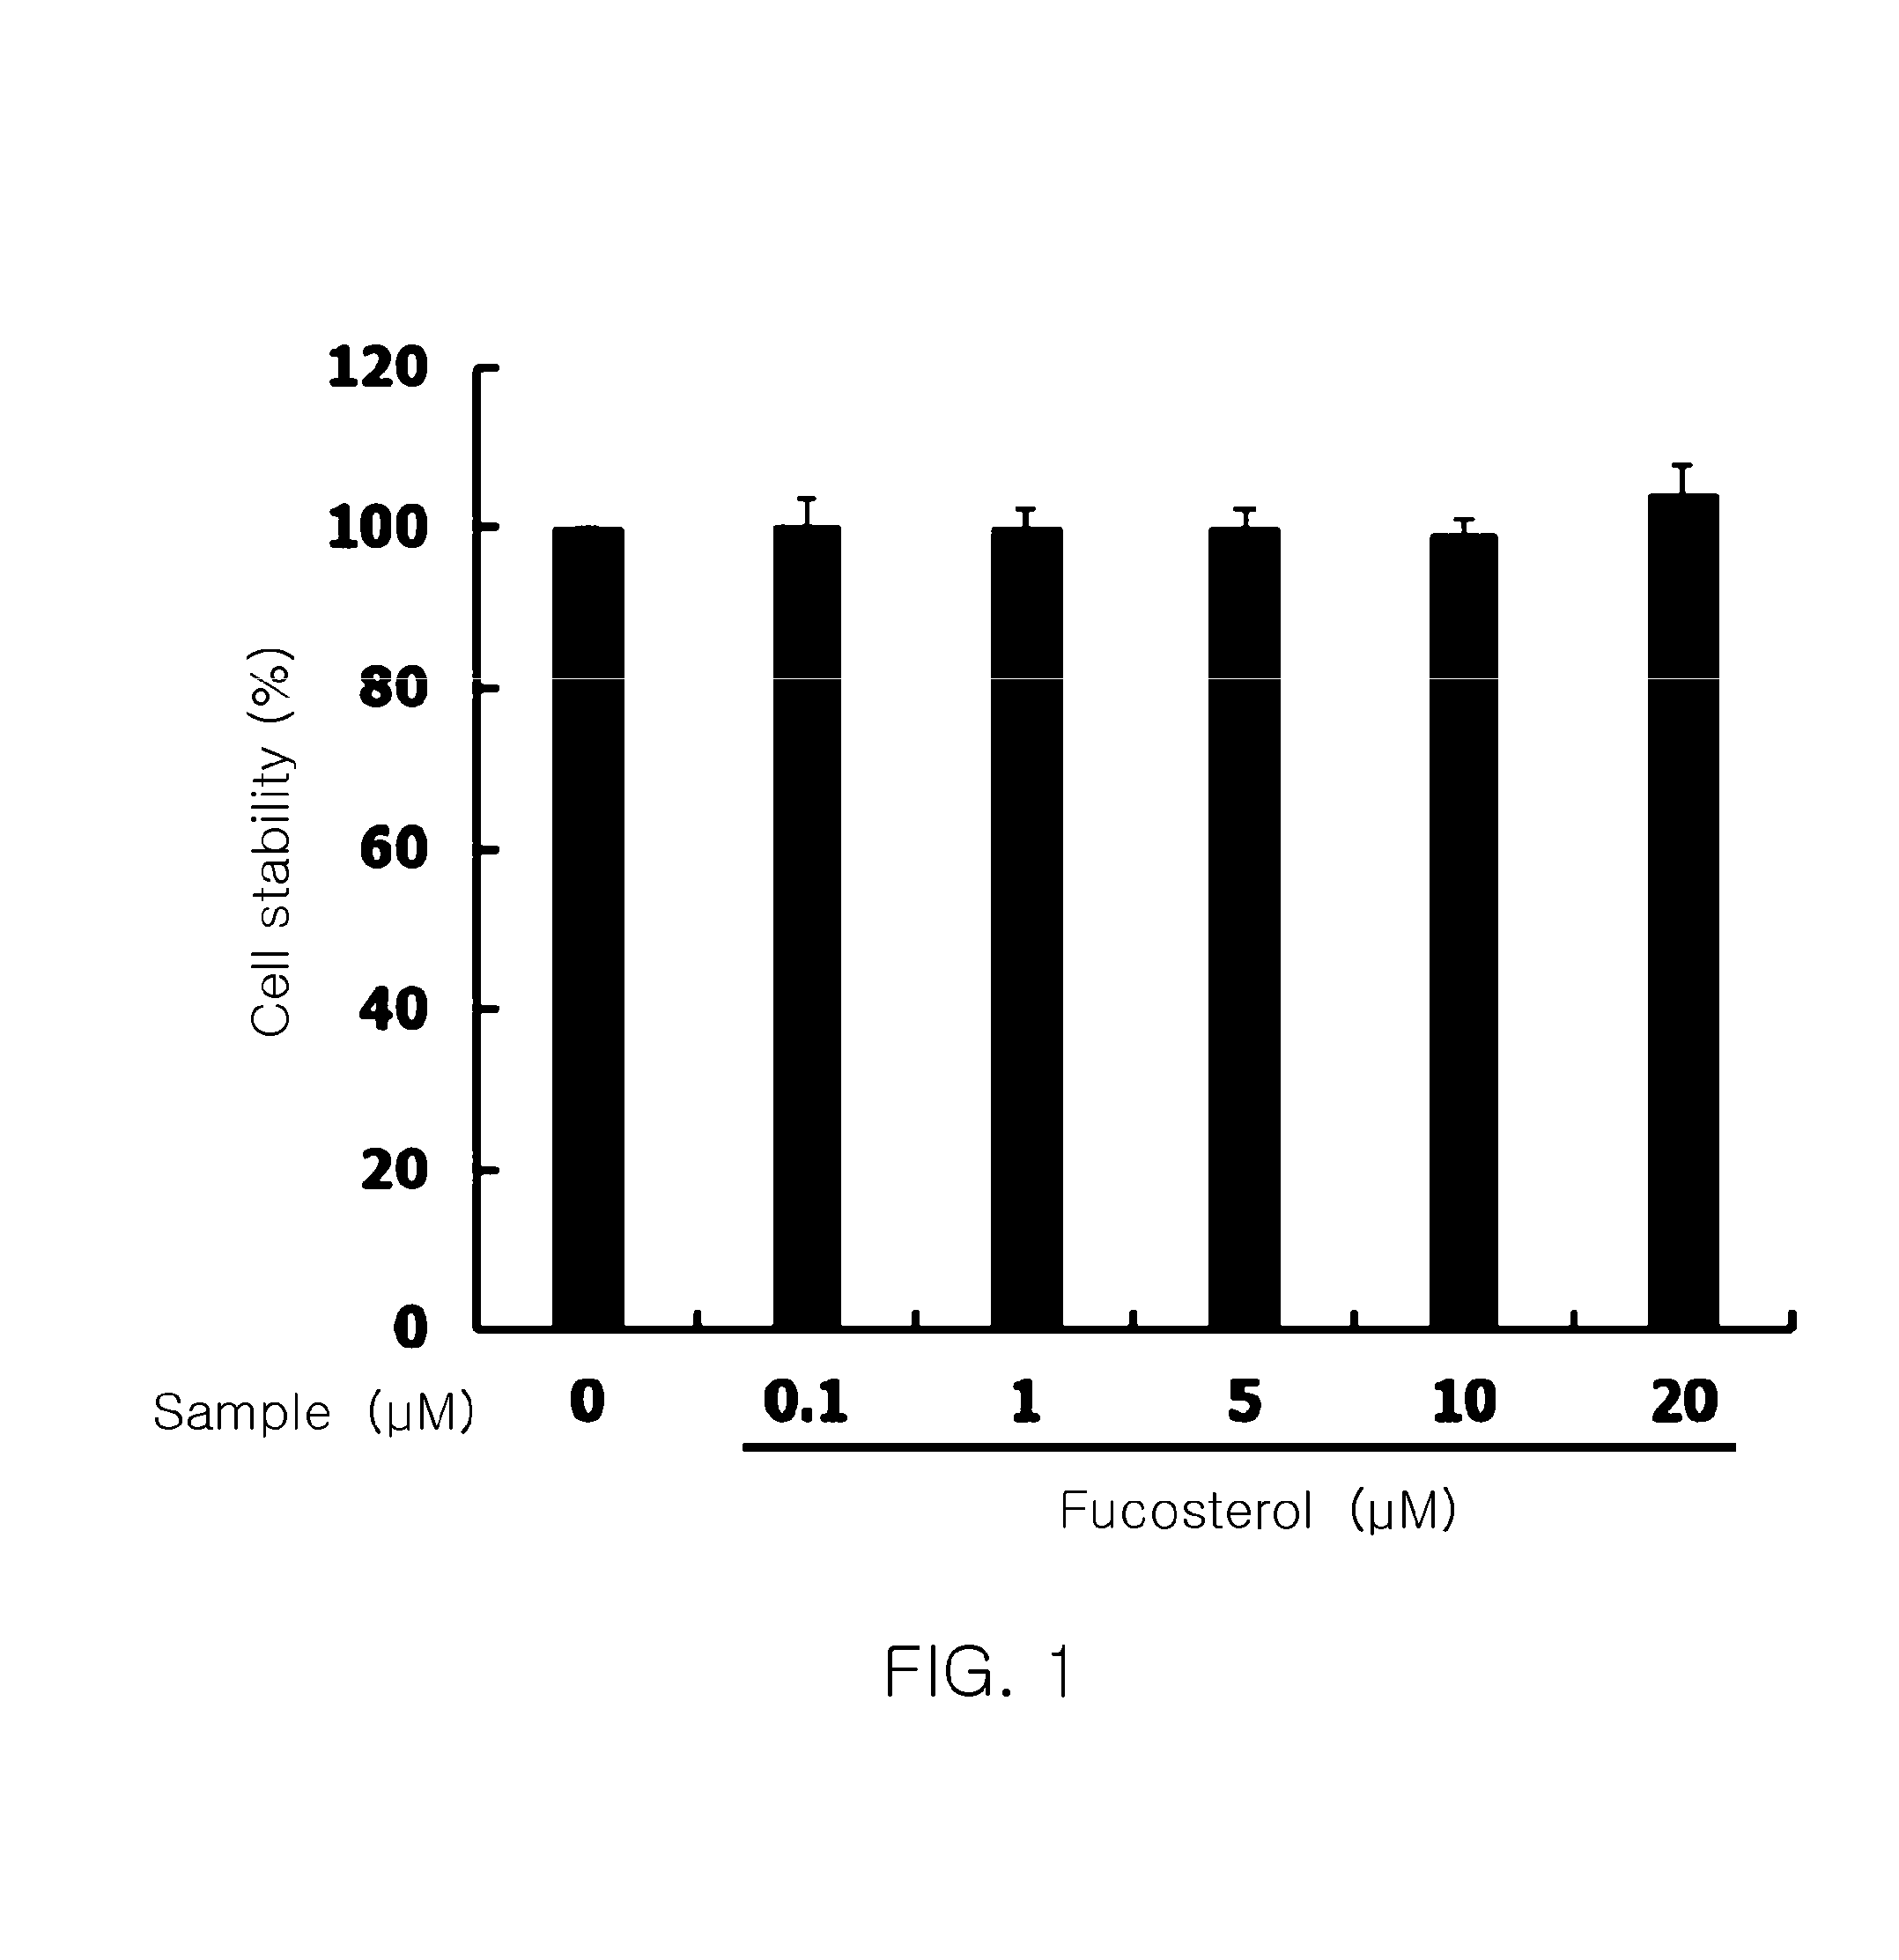 Composition containing fucosterol for skin whitening or moisturizing